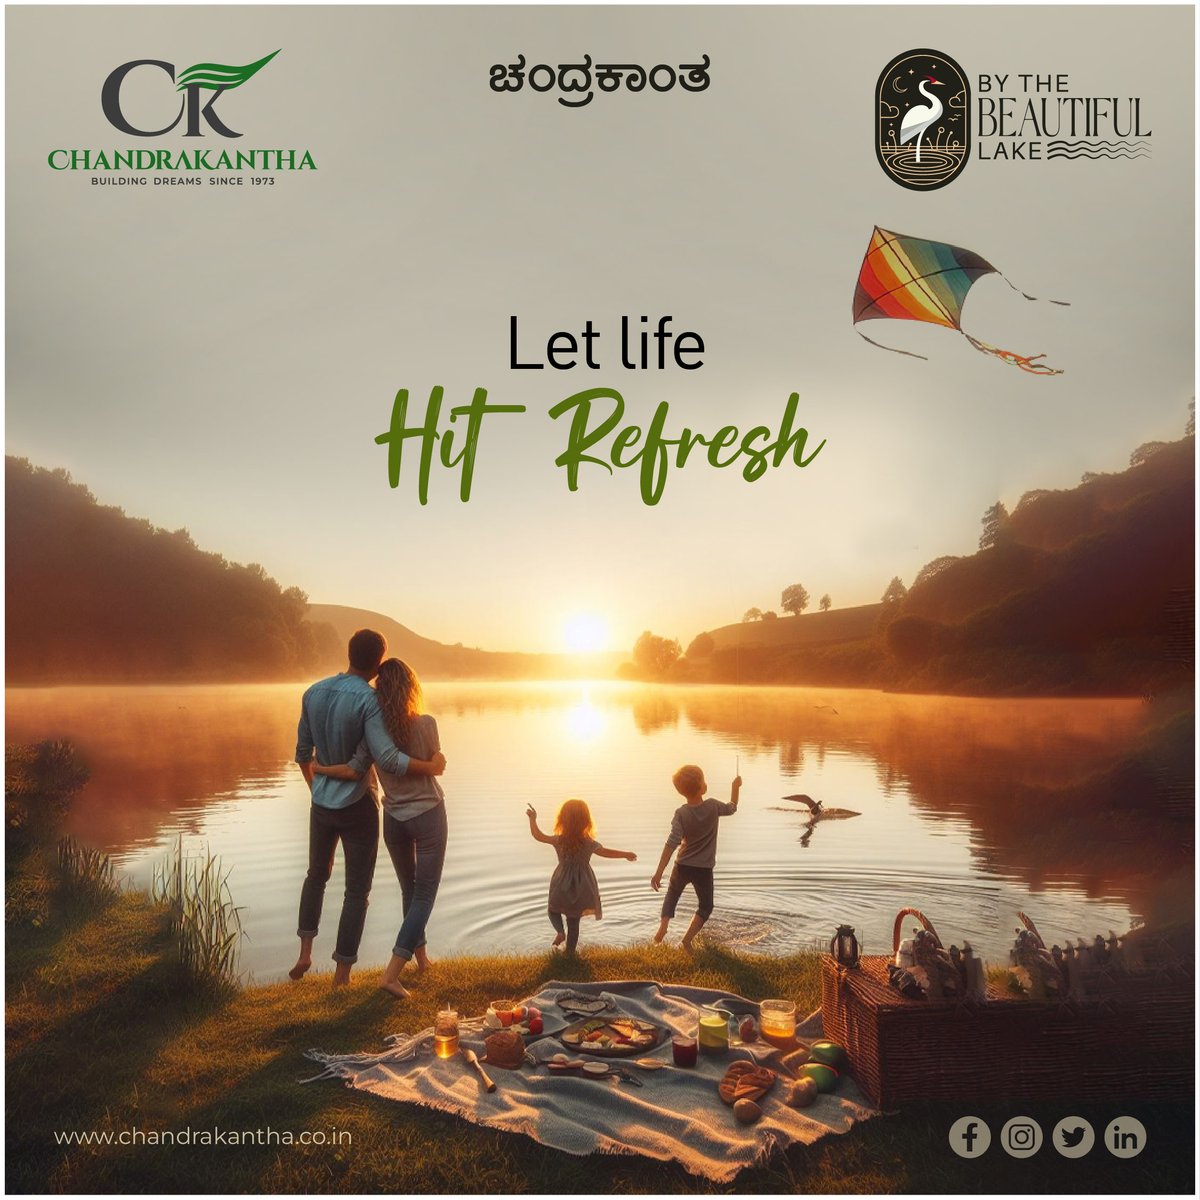 Escape the chaos and embrace serenity by the beautiful lake. Let life hit refresh in your own piece of paradise. Discover your dream home today.

#chandrakanthadevelopers #2bhkvillas #3bhkvillas #lakefrontvillas #lakeview #lakefronthouse #luxuryhomes #house #homesweethome